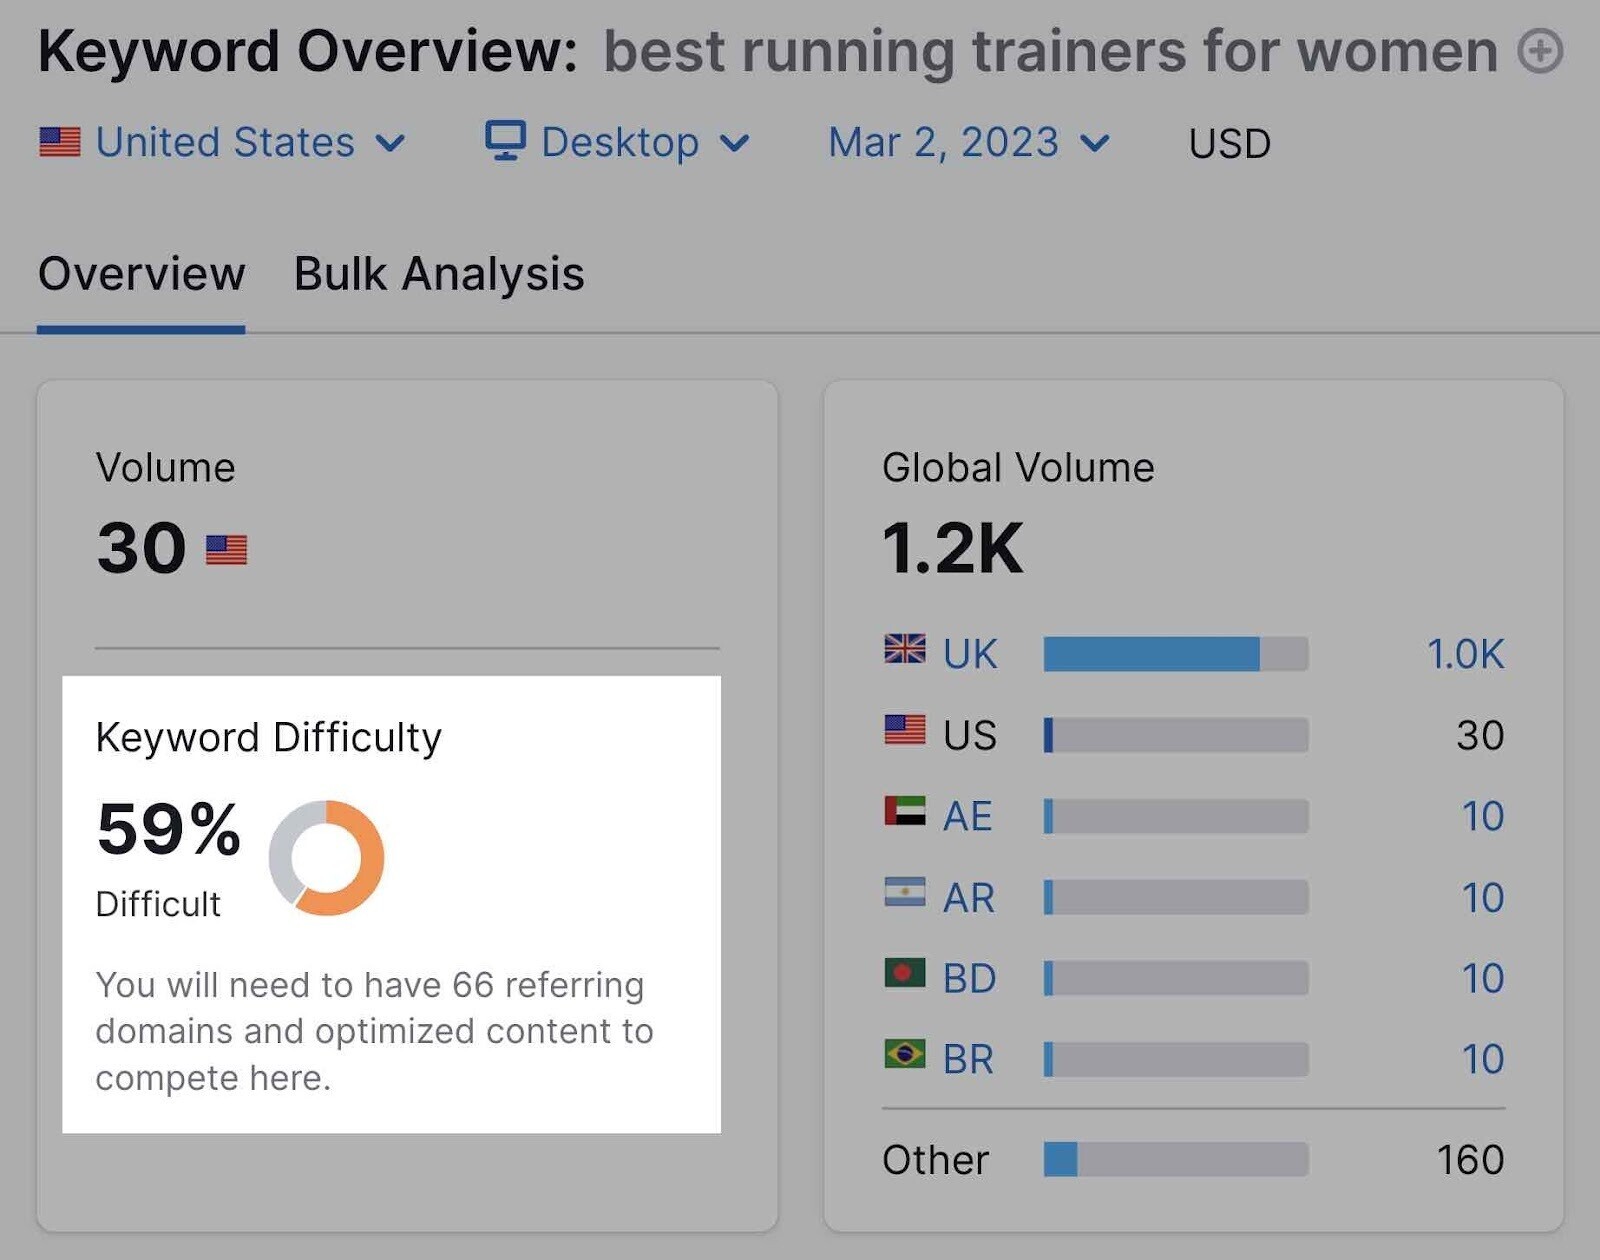 best running trainers for women in Keyword Overview